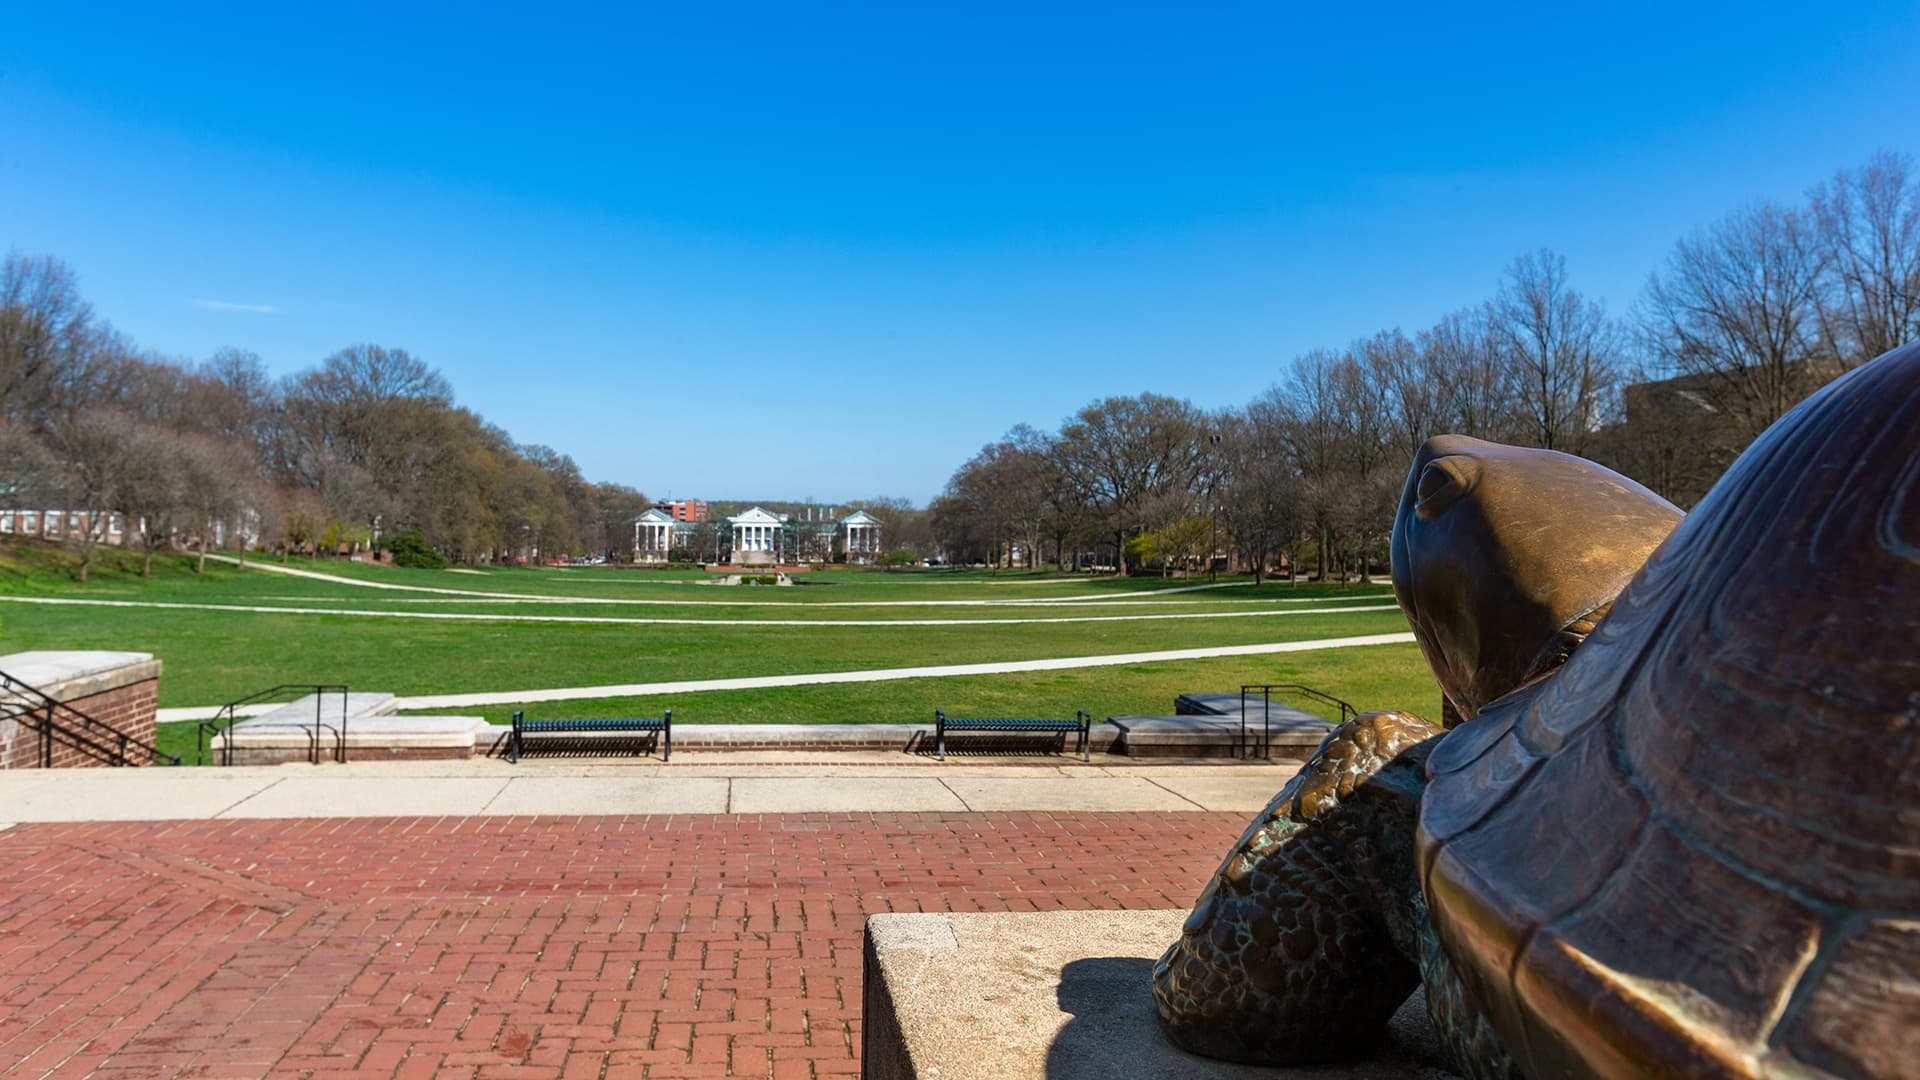 Testudo, the bronze statue, basking in the sun of a clear blue day, as they look over the wide green lawns of Mckeldin Mall